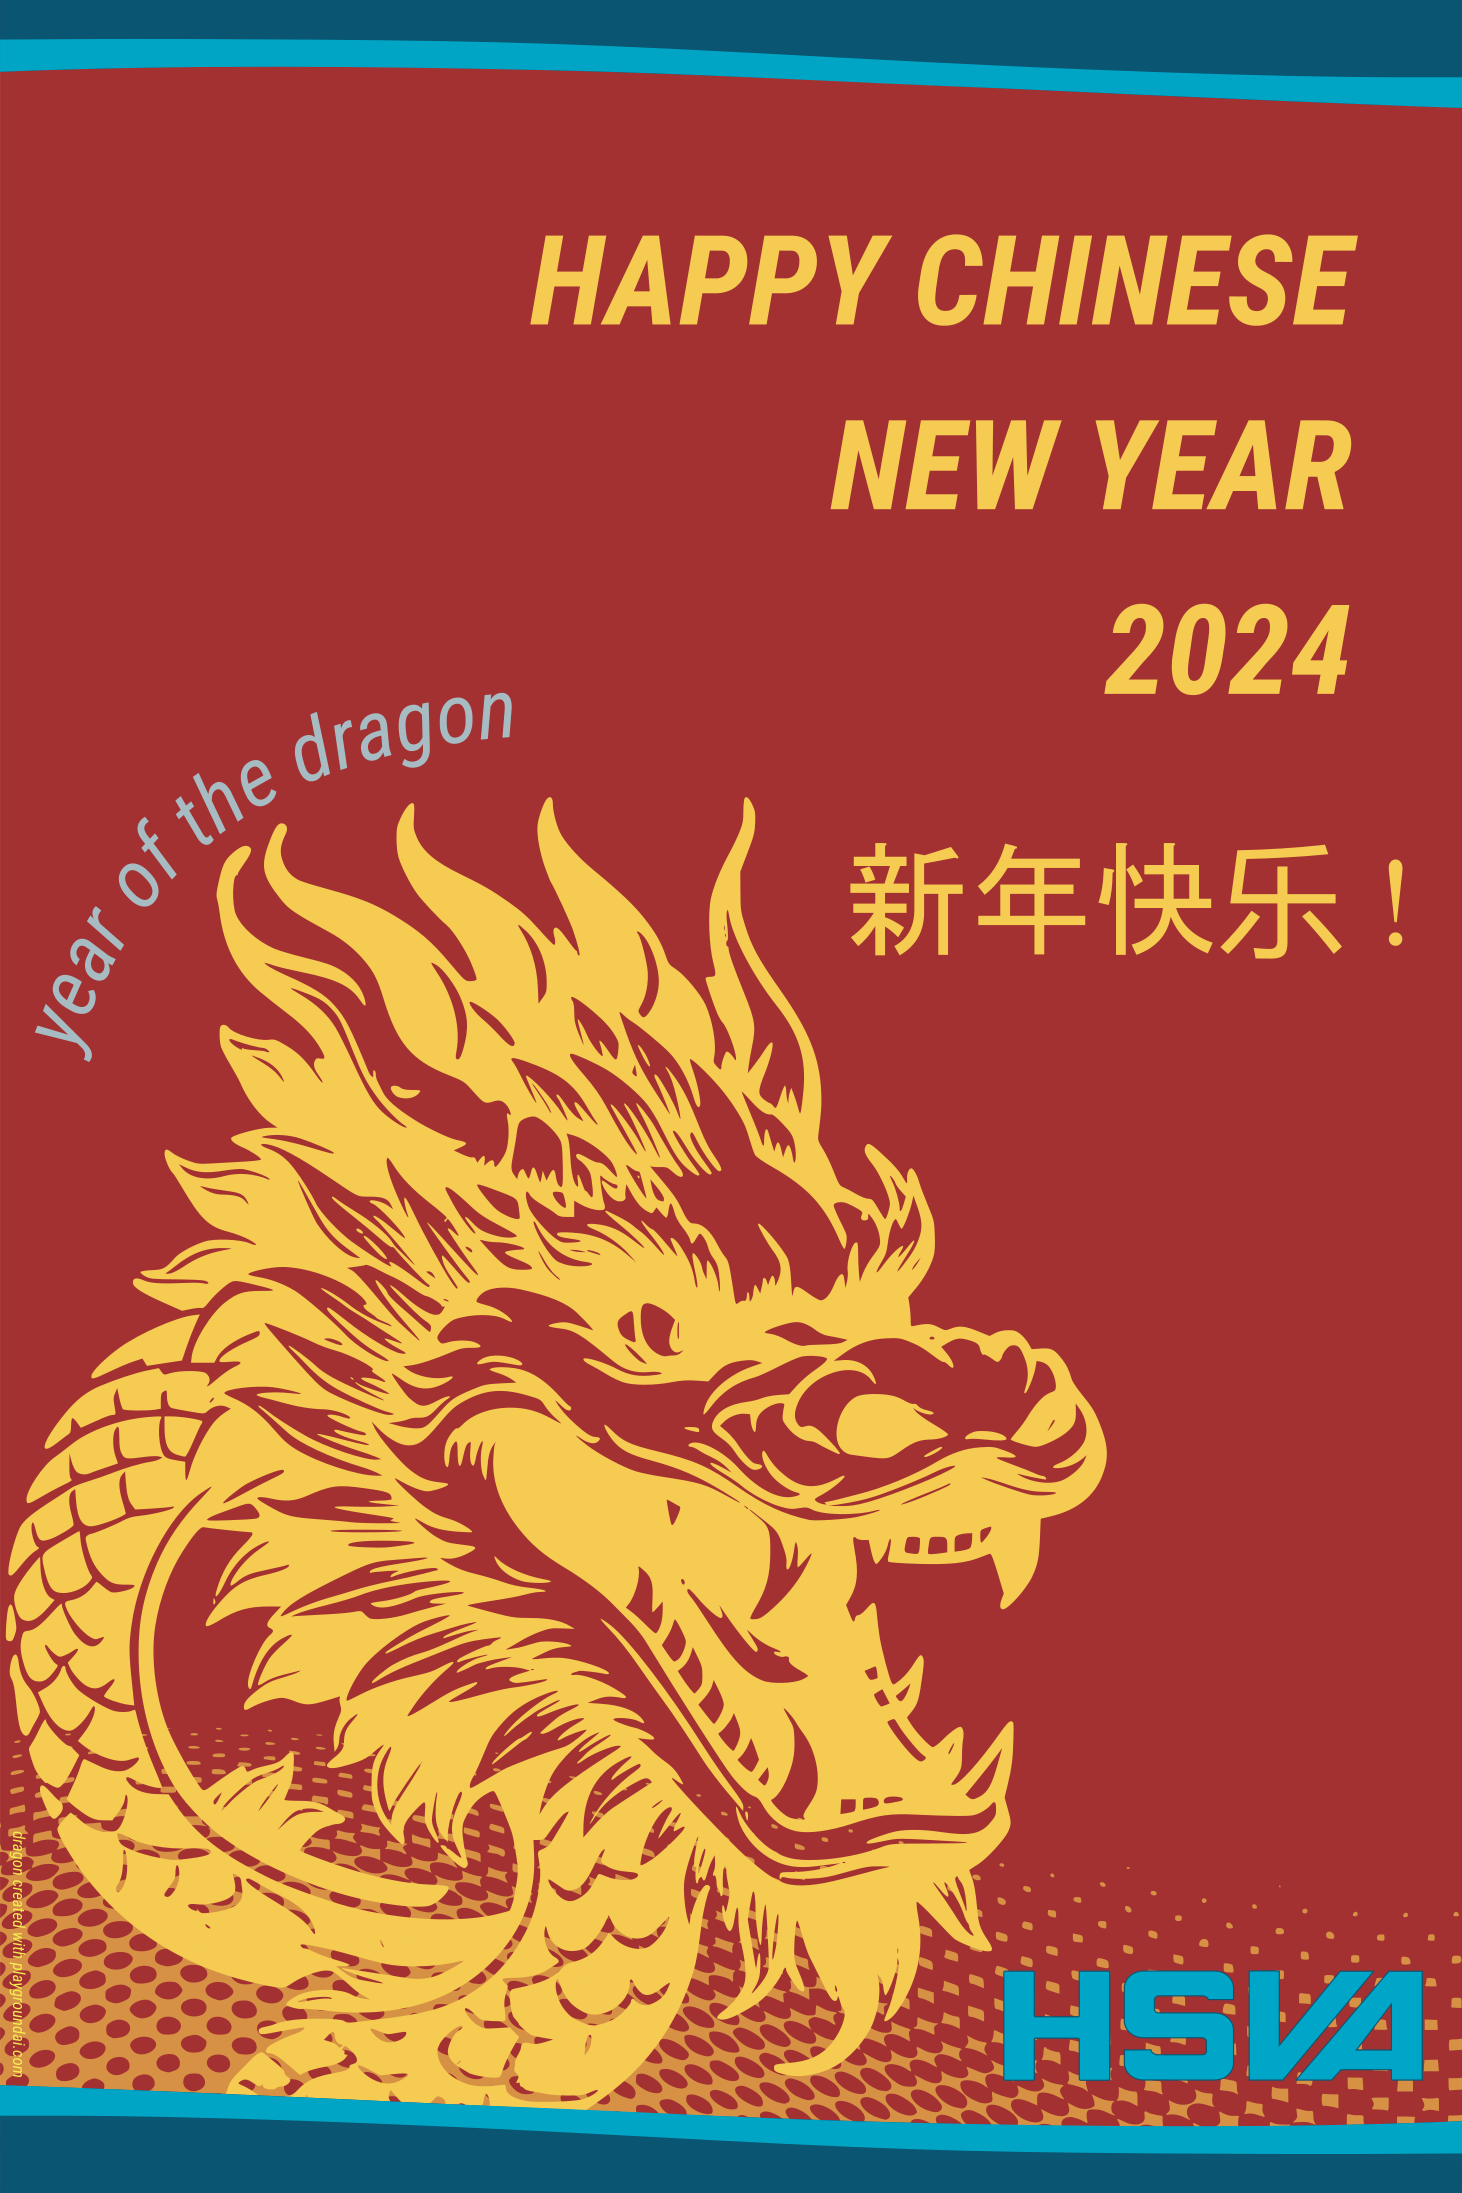 Foto HAPPY CHINESE NEW YEAR 2024 - 新年快乐 ！